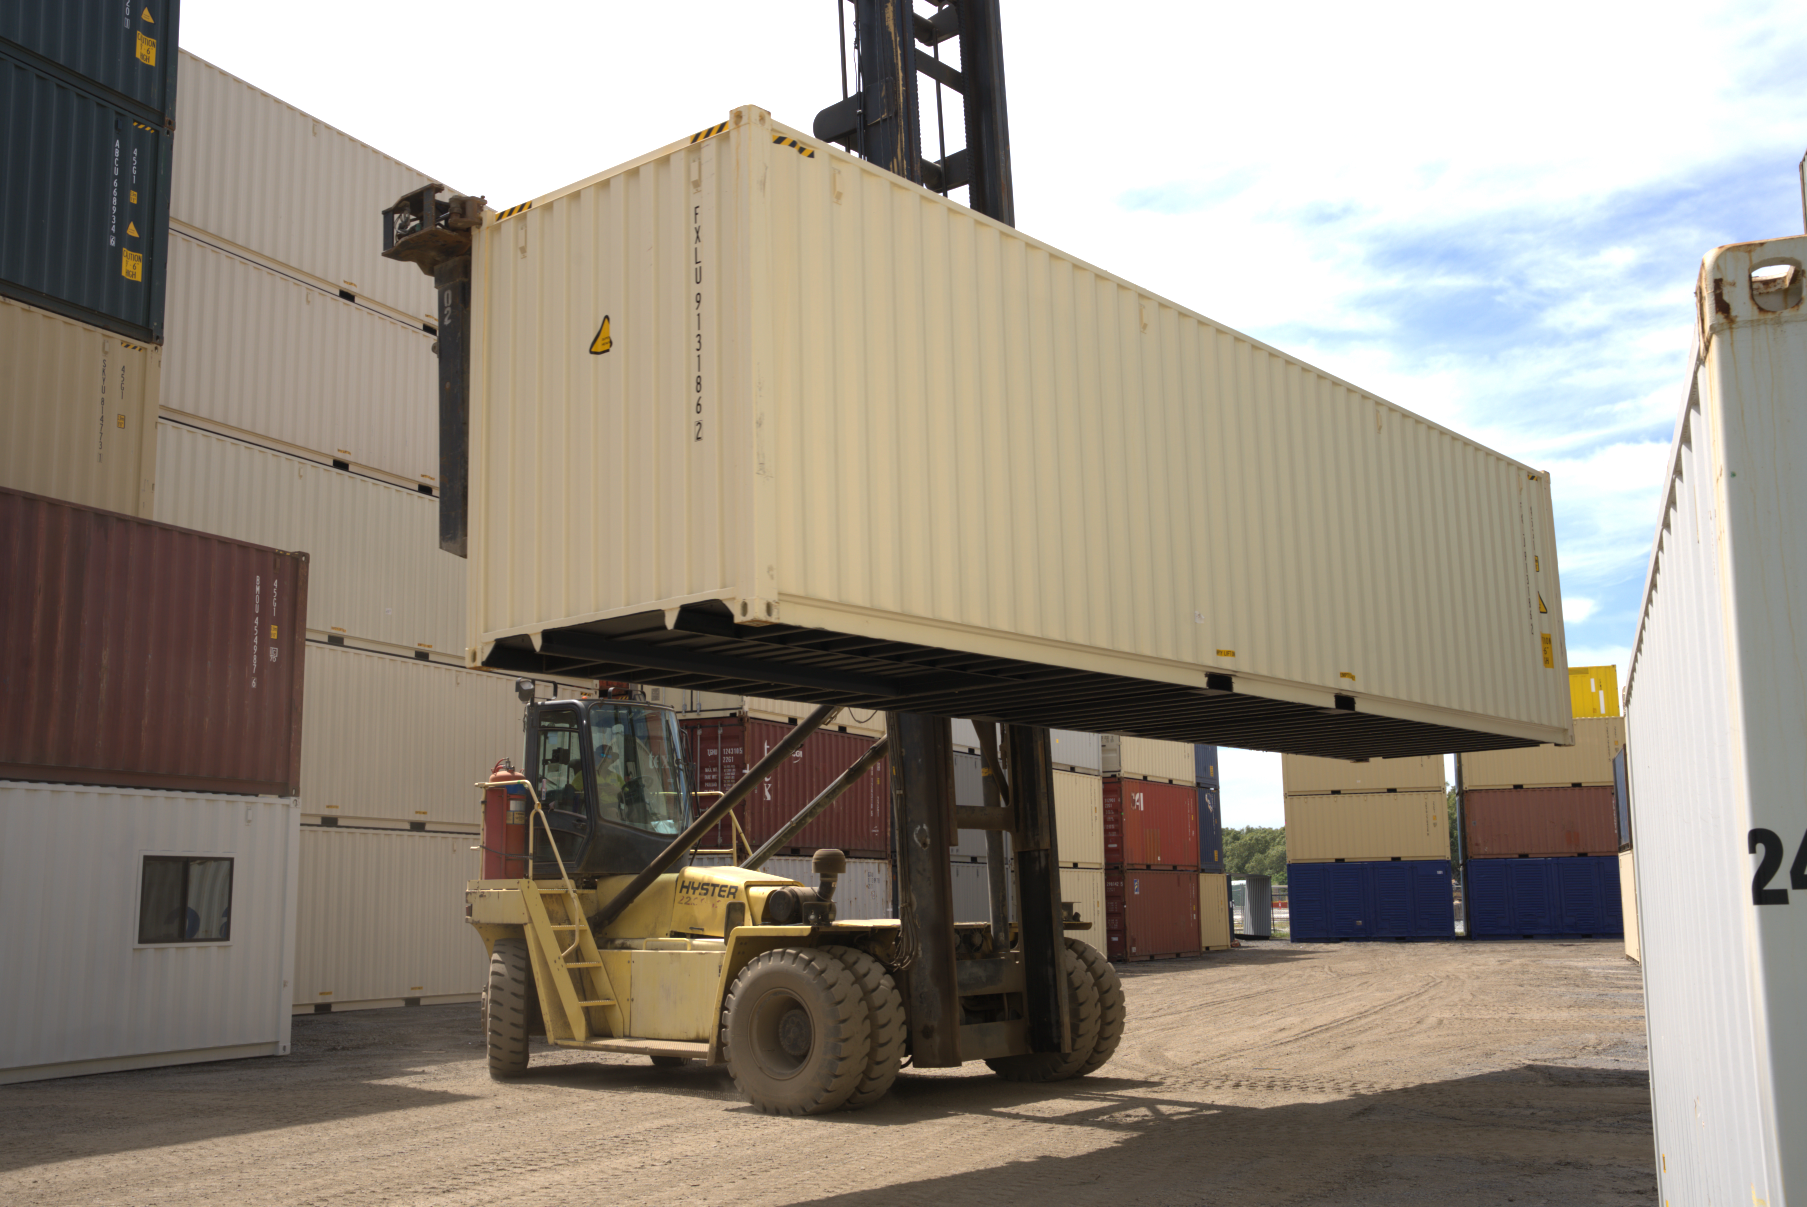 40ft shipping container being held by a forklift